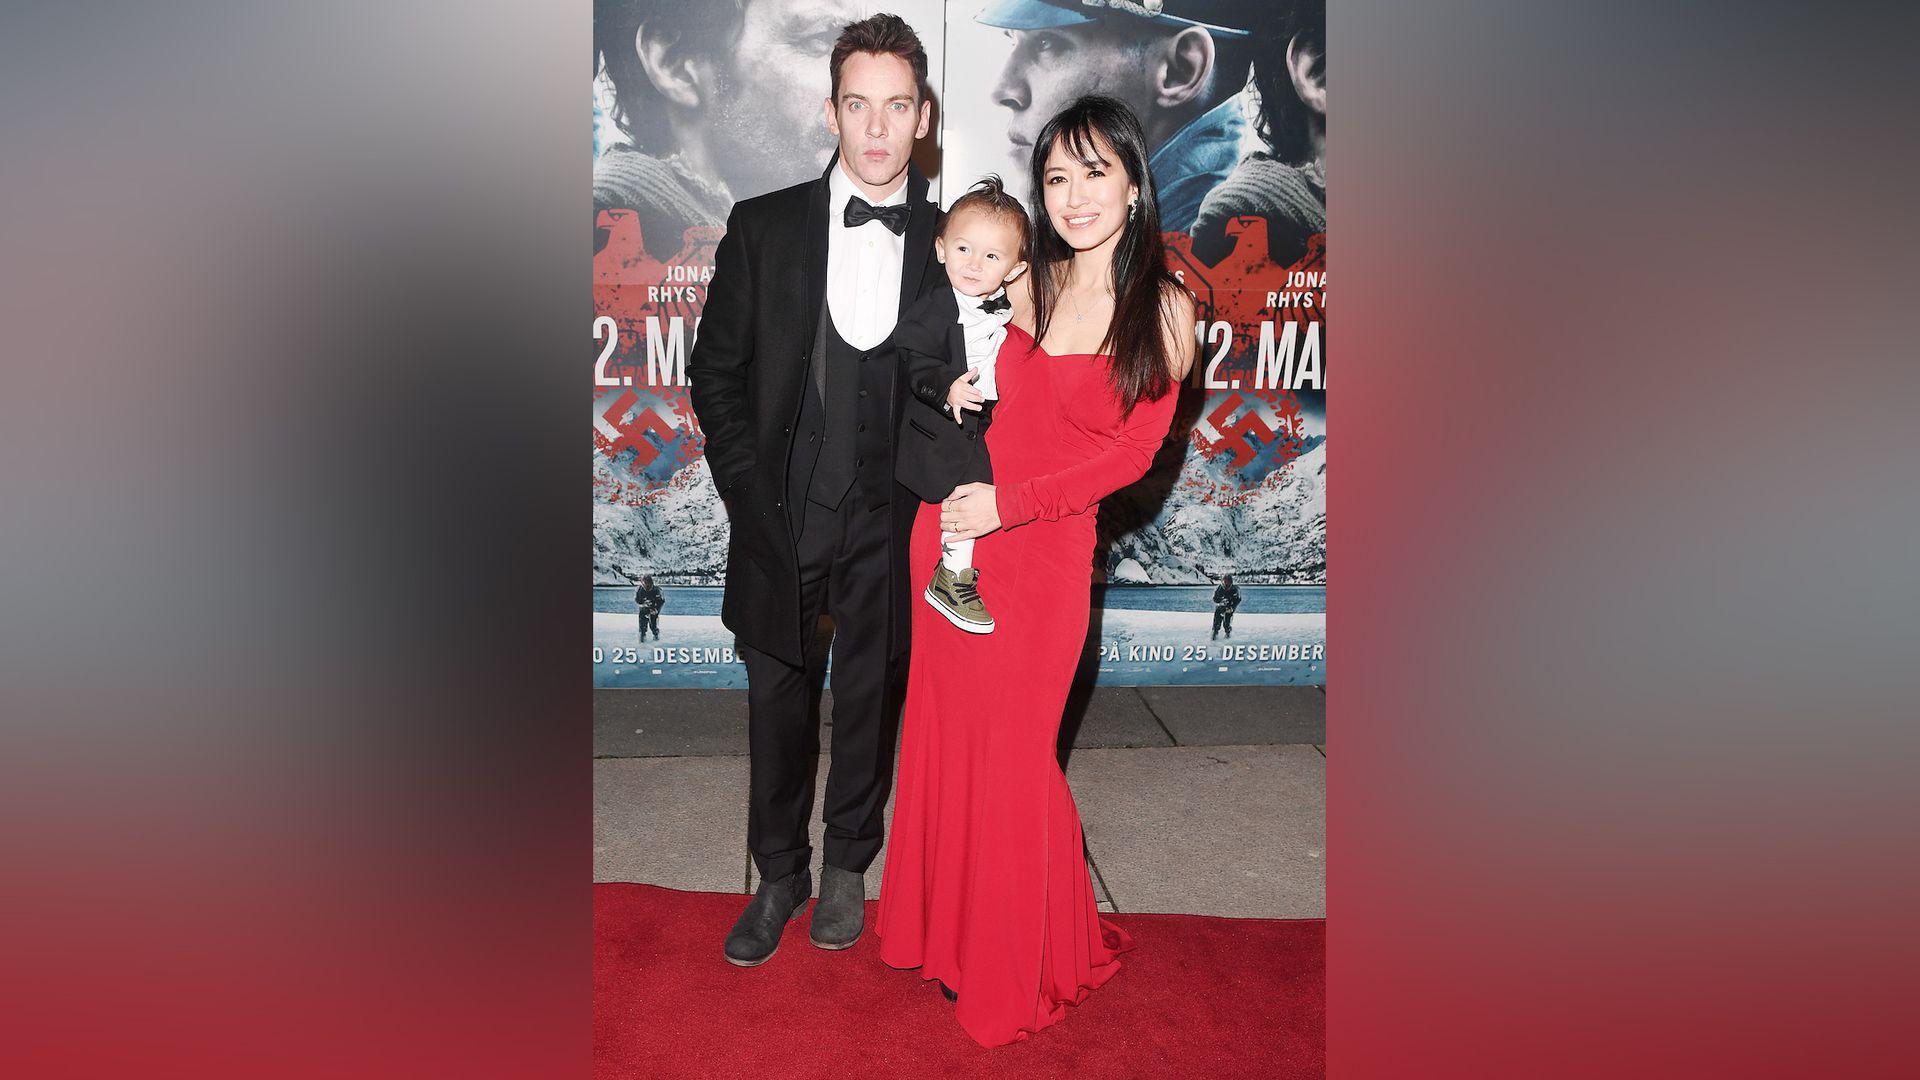 Jonathan Rhys Meyers with his wife and son